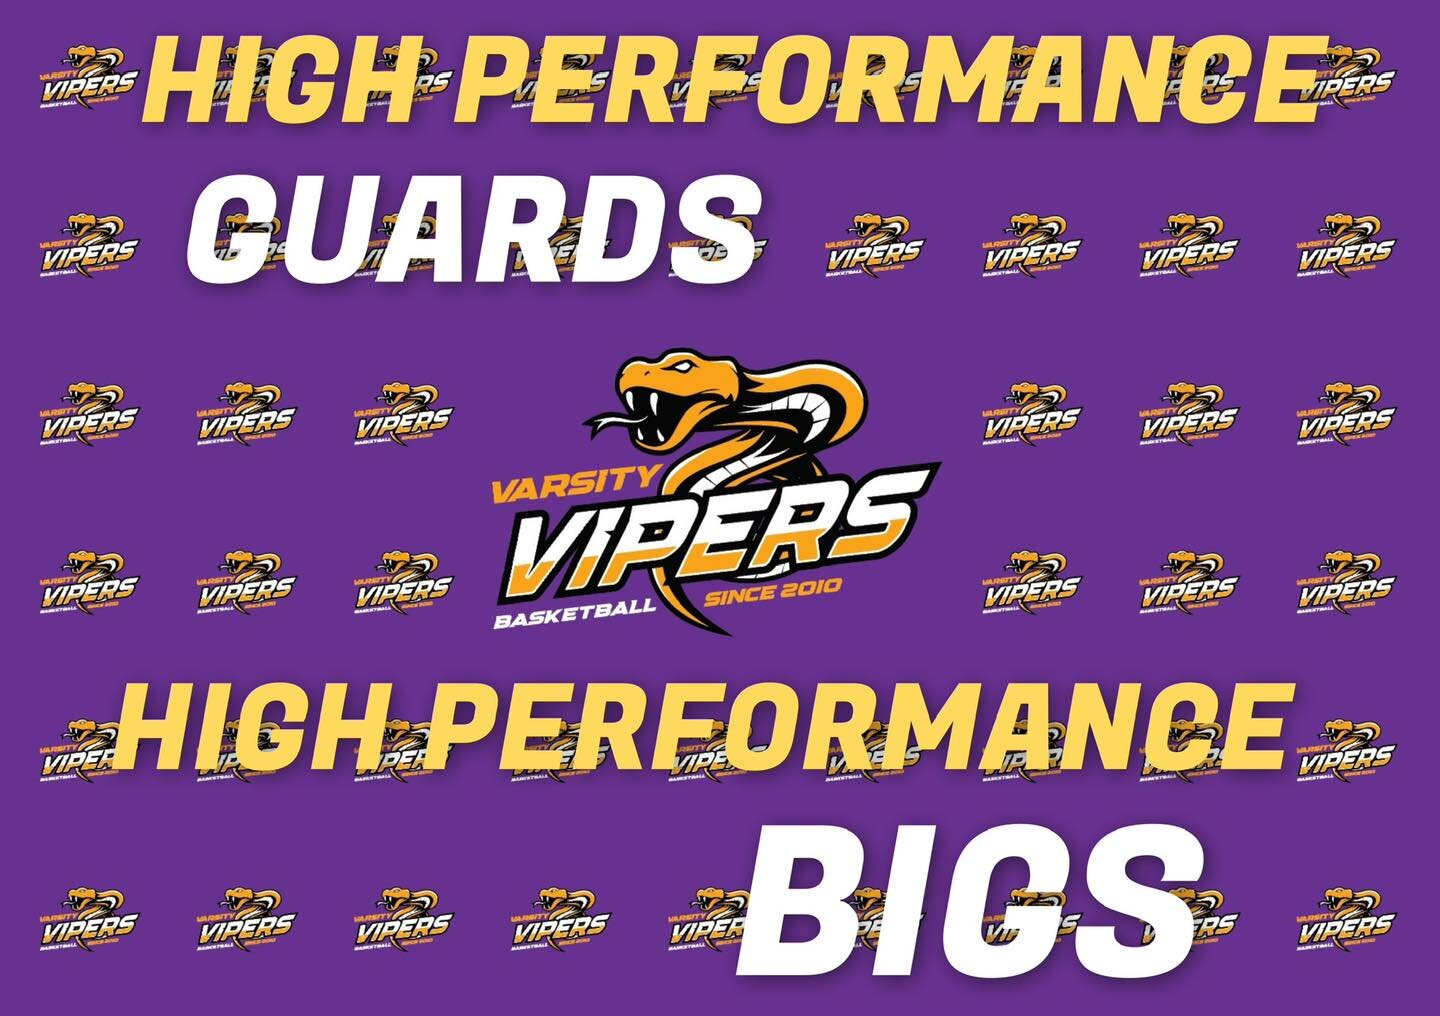 HIGH PERFORMANCE HOOPS IS BACK!

High Performance sessions for our GUARDS &amp; BIGS positions are back for another the Easter break..

GUARDS sessions will focus on:
🏀 Ball handling 🏀 Passing 🏀 On ball defence 🏀  Shooting

BIGS sessions will foc